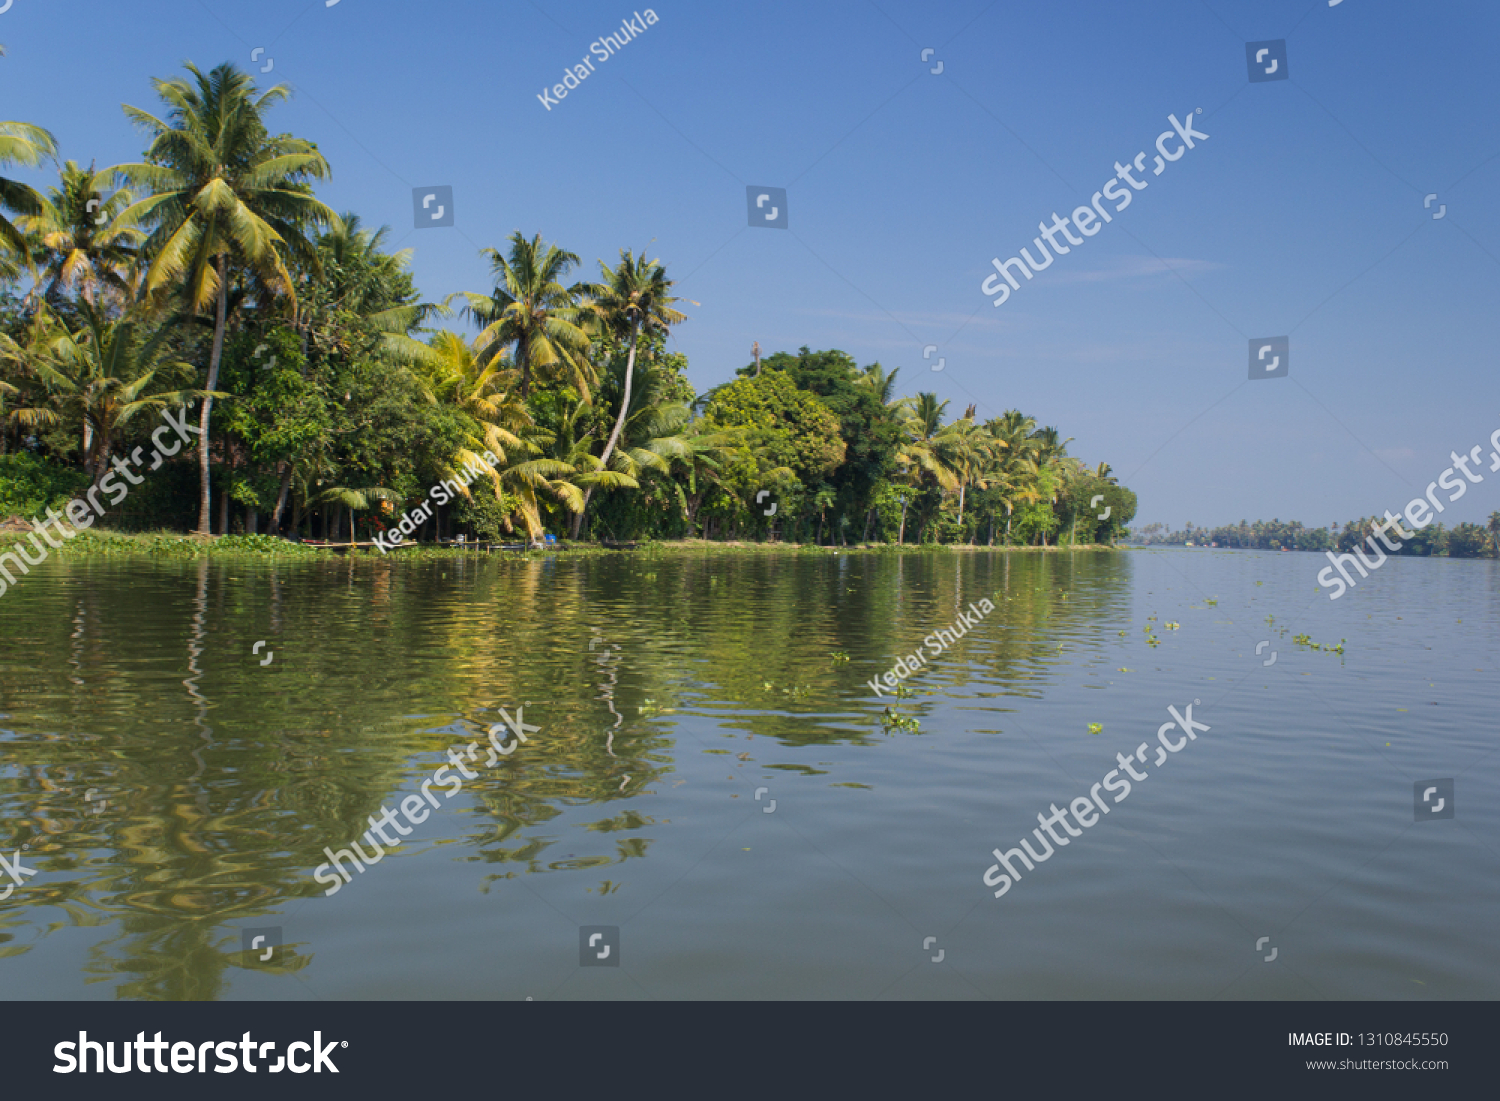 A shot of coconut trees and shrubs on the banks of backwaters of Alleppey, Kerala taken on bright sunny day with clear blue sky and reflection in water symmetrically visible in the shot & blank space. #1310845550